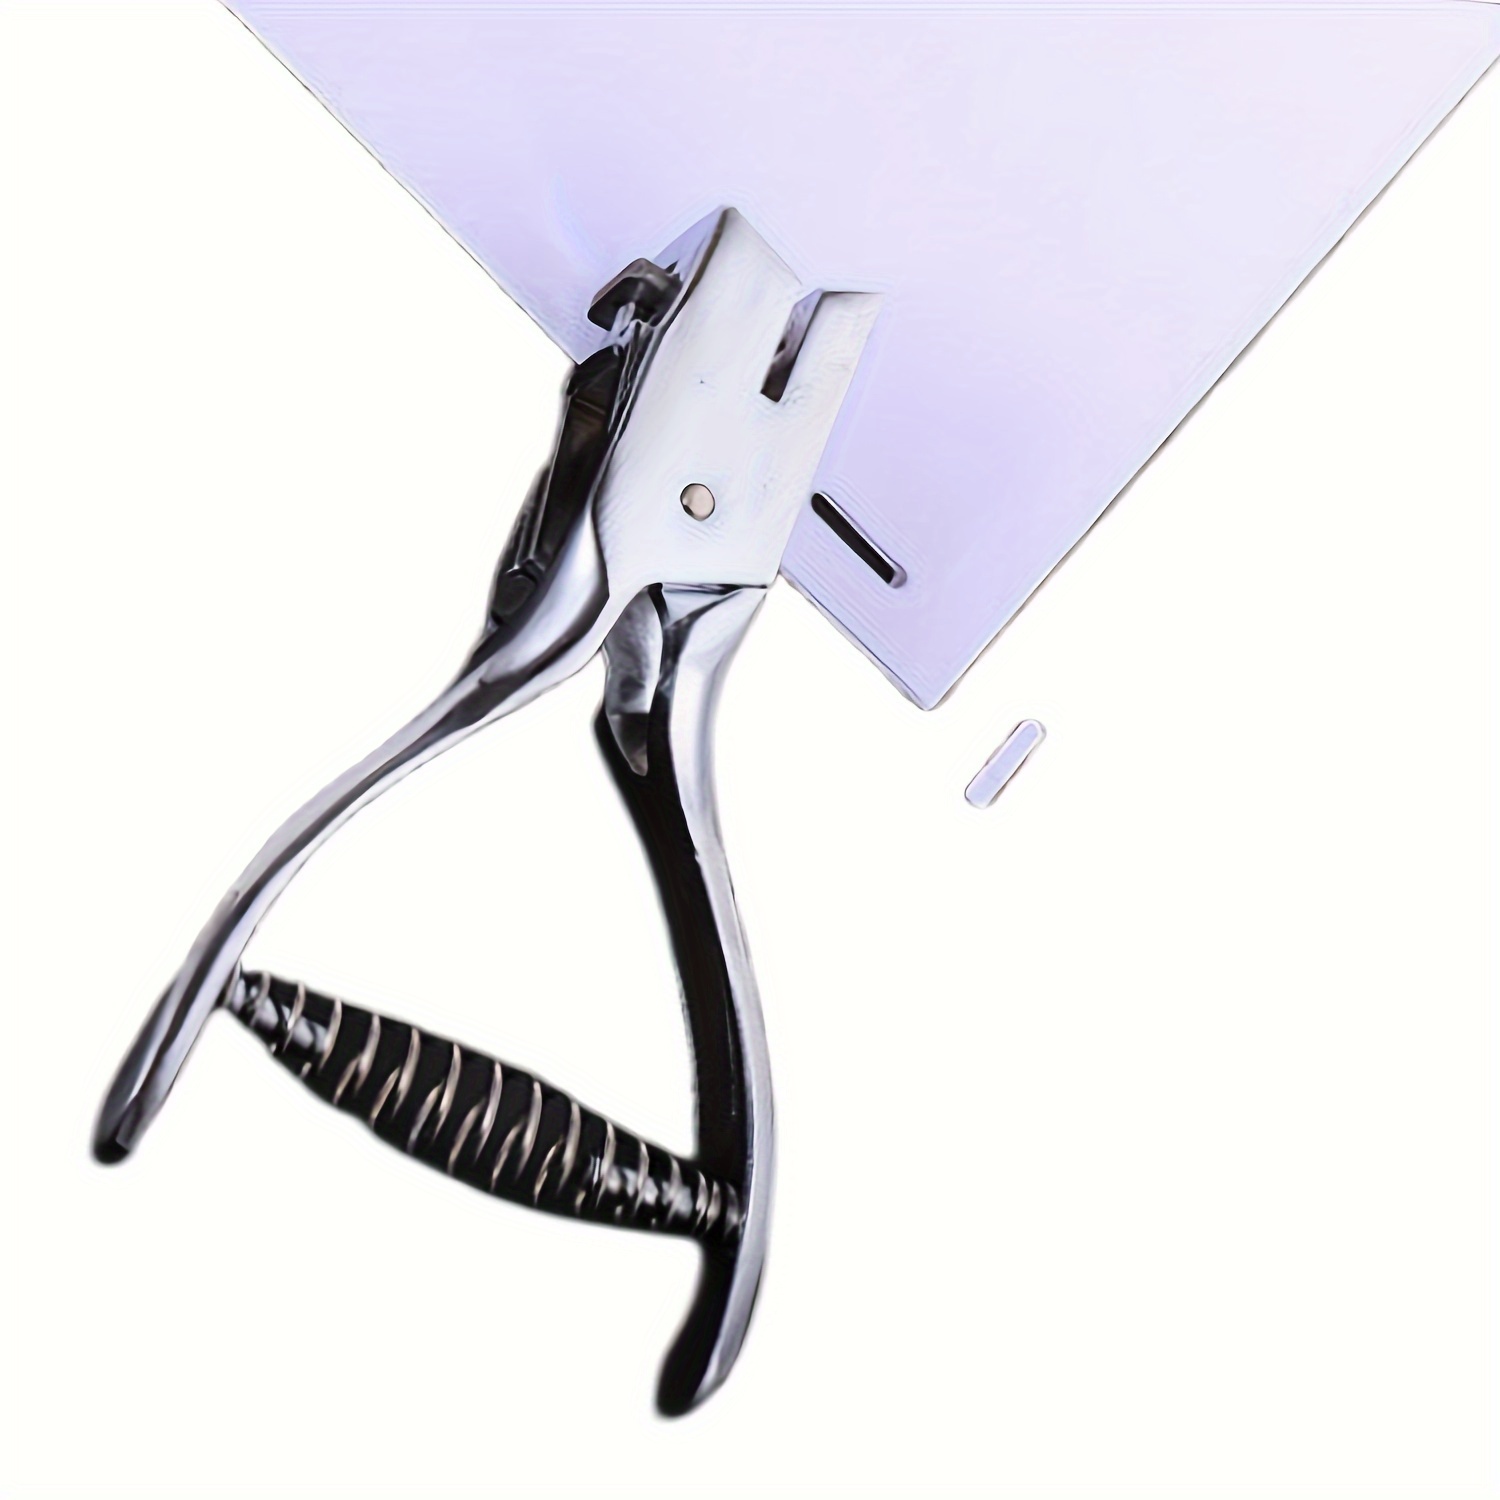 

Fromthenon Metal Id Card Punch Pliers, Elliptical Hole - Manual Punch Machine For Diy Cards, Mobile Phone Film, Office & School Use - 1pc, Punches Up To 8 Pages